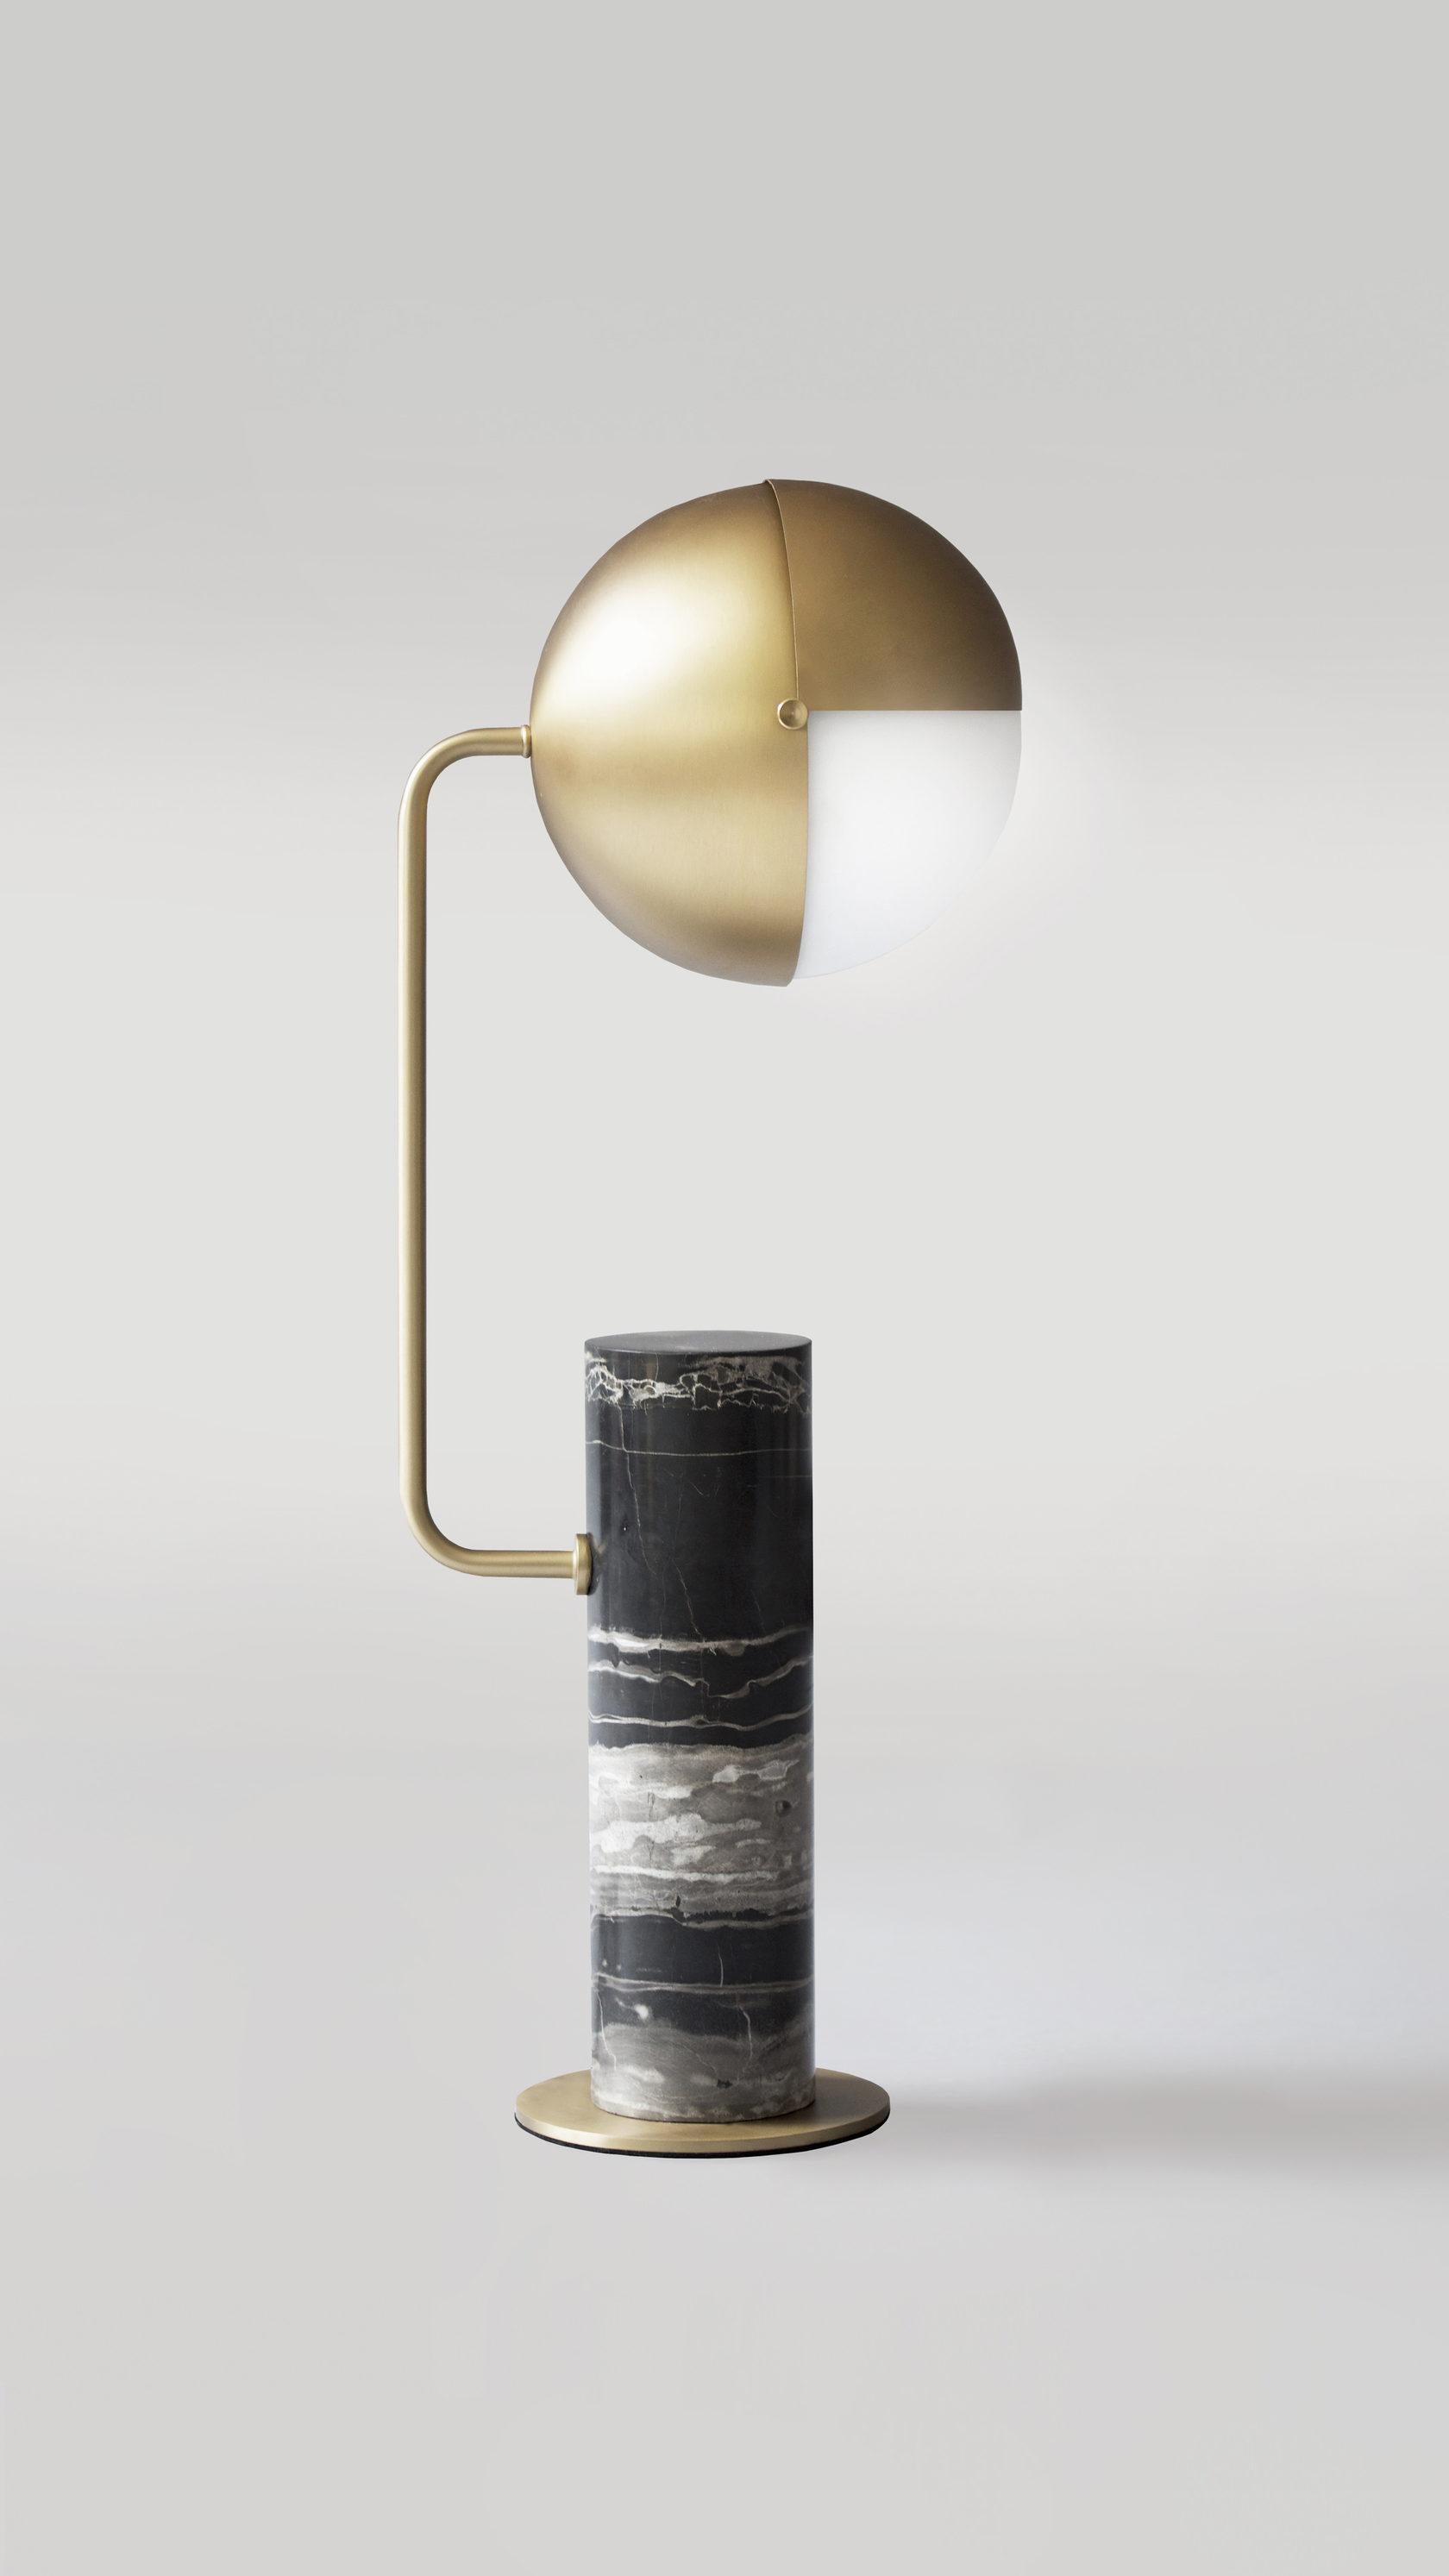 Brass Another Table Lamp by Square in Circle
Dimensions: H 60 x W 25.6 x 25.6 cm.
Materials: brushed brass finish, frosted glass, black marble base. 

A marble base table lamp with a rounded projecting arm to one side, topped with an unusual metal